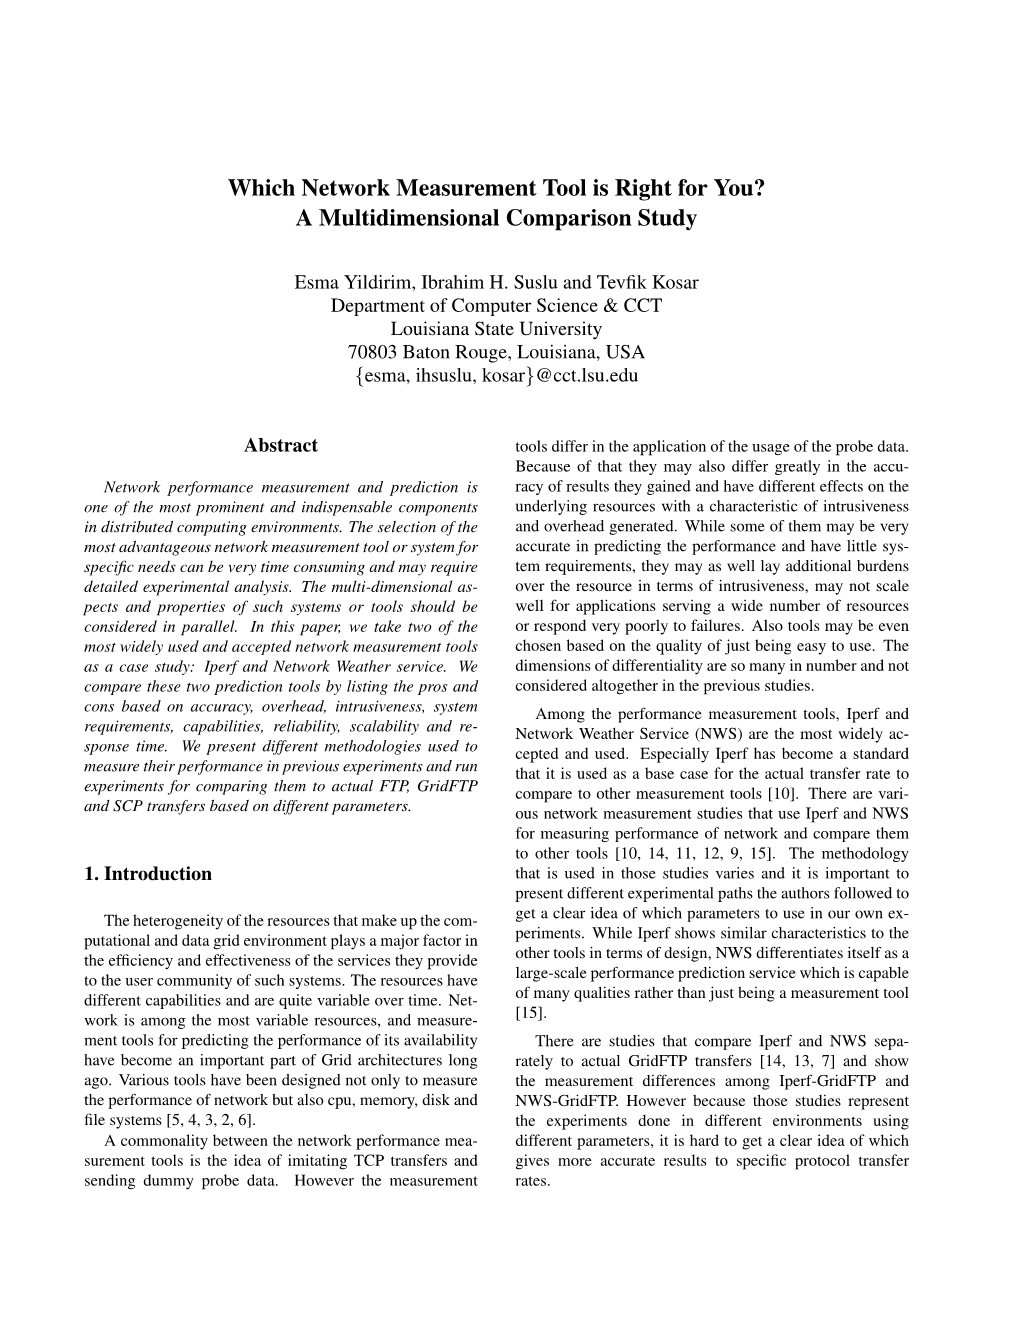 Which Network Measurement Tool Is Right for You? a Multidimensional Comparison Study